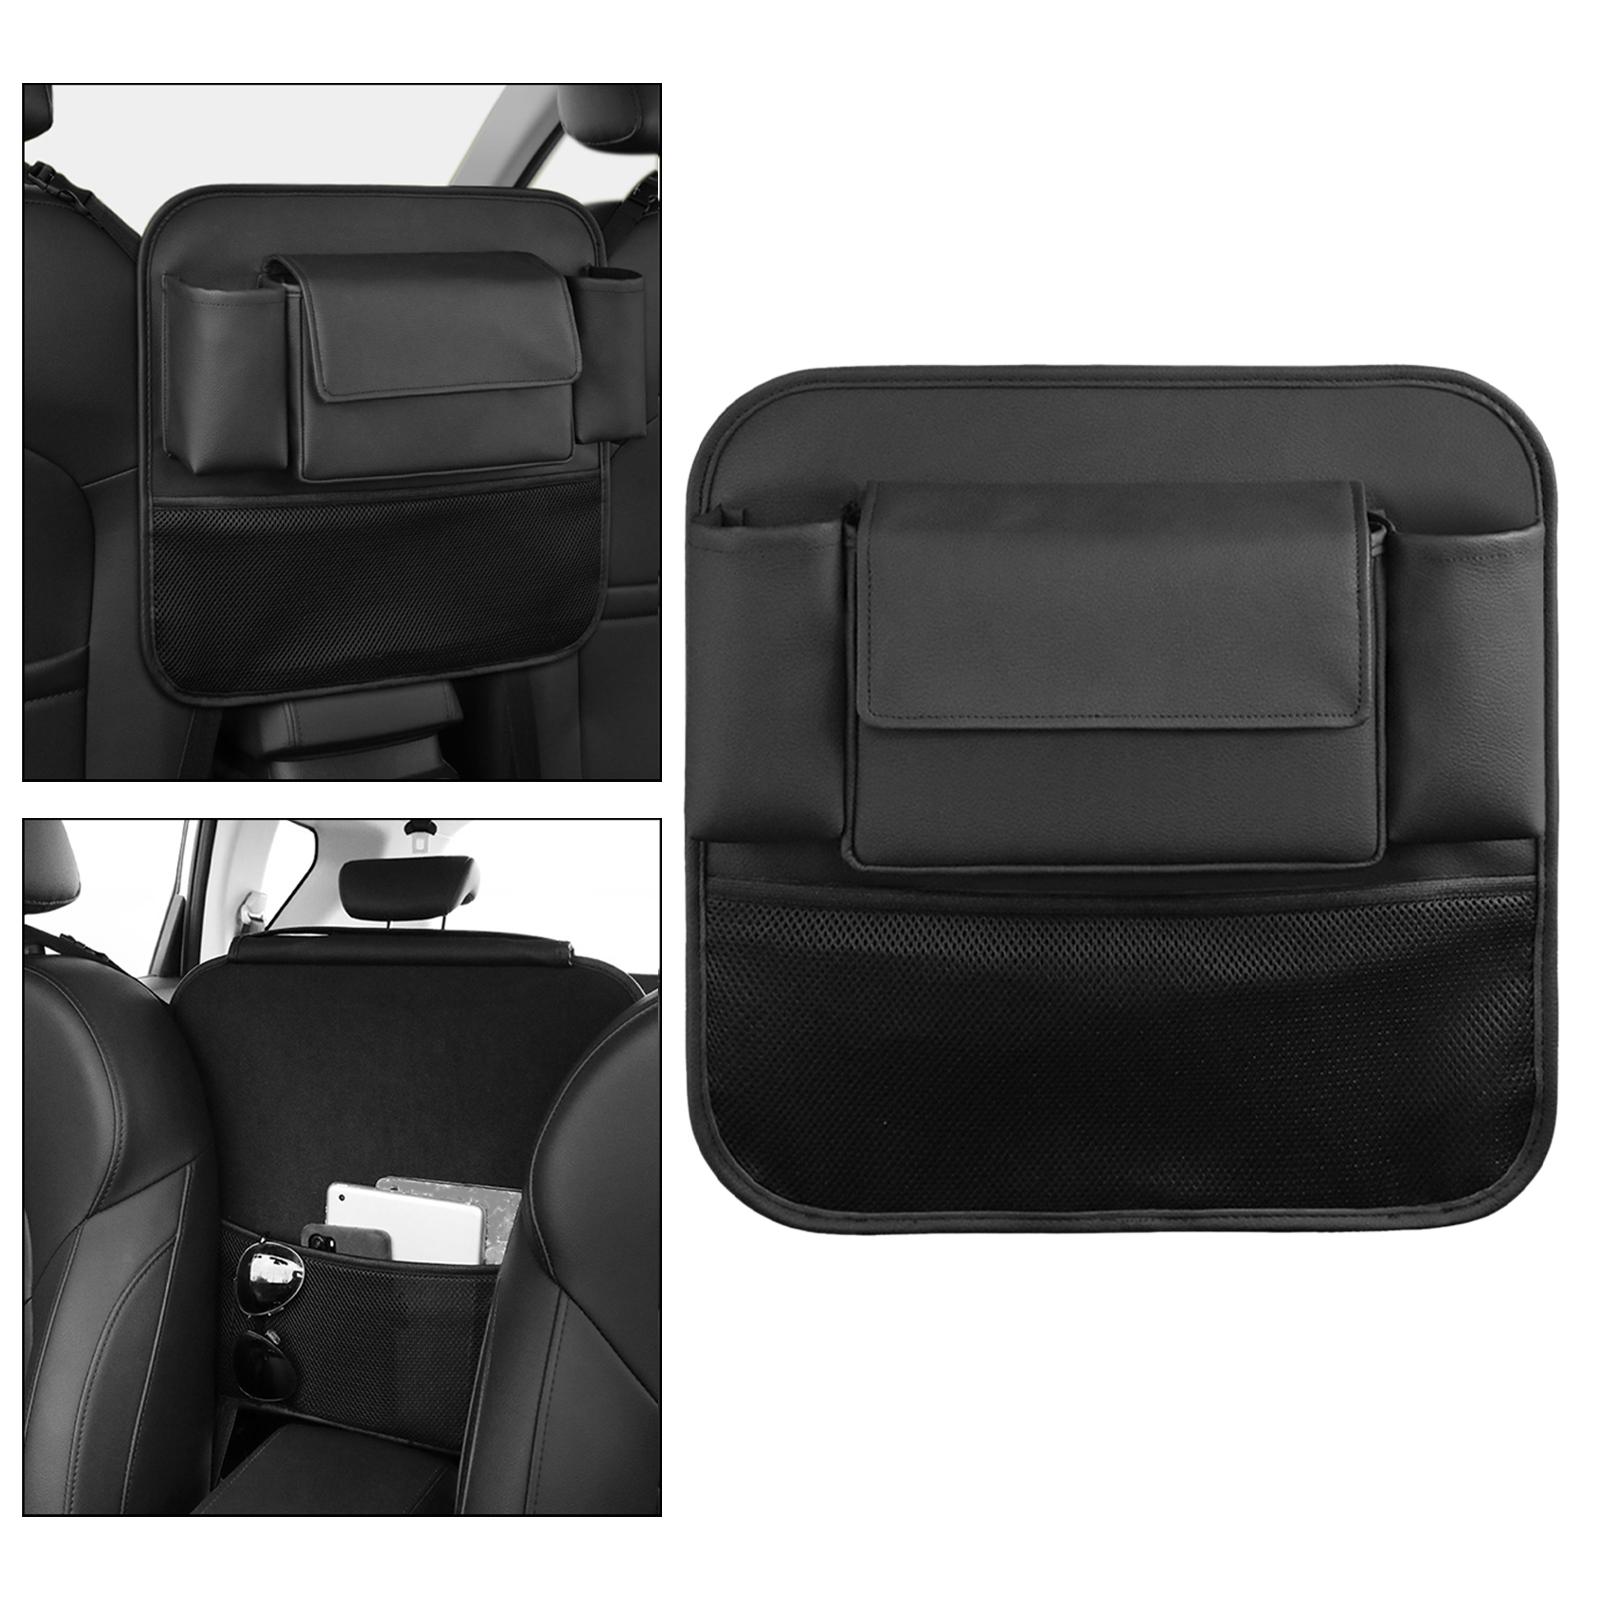 Car Organizer Between Front Seats PU Leather for Document Snacks Phones Black